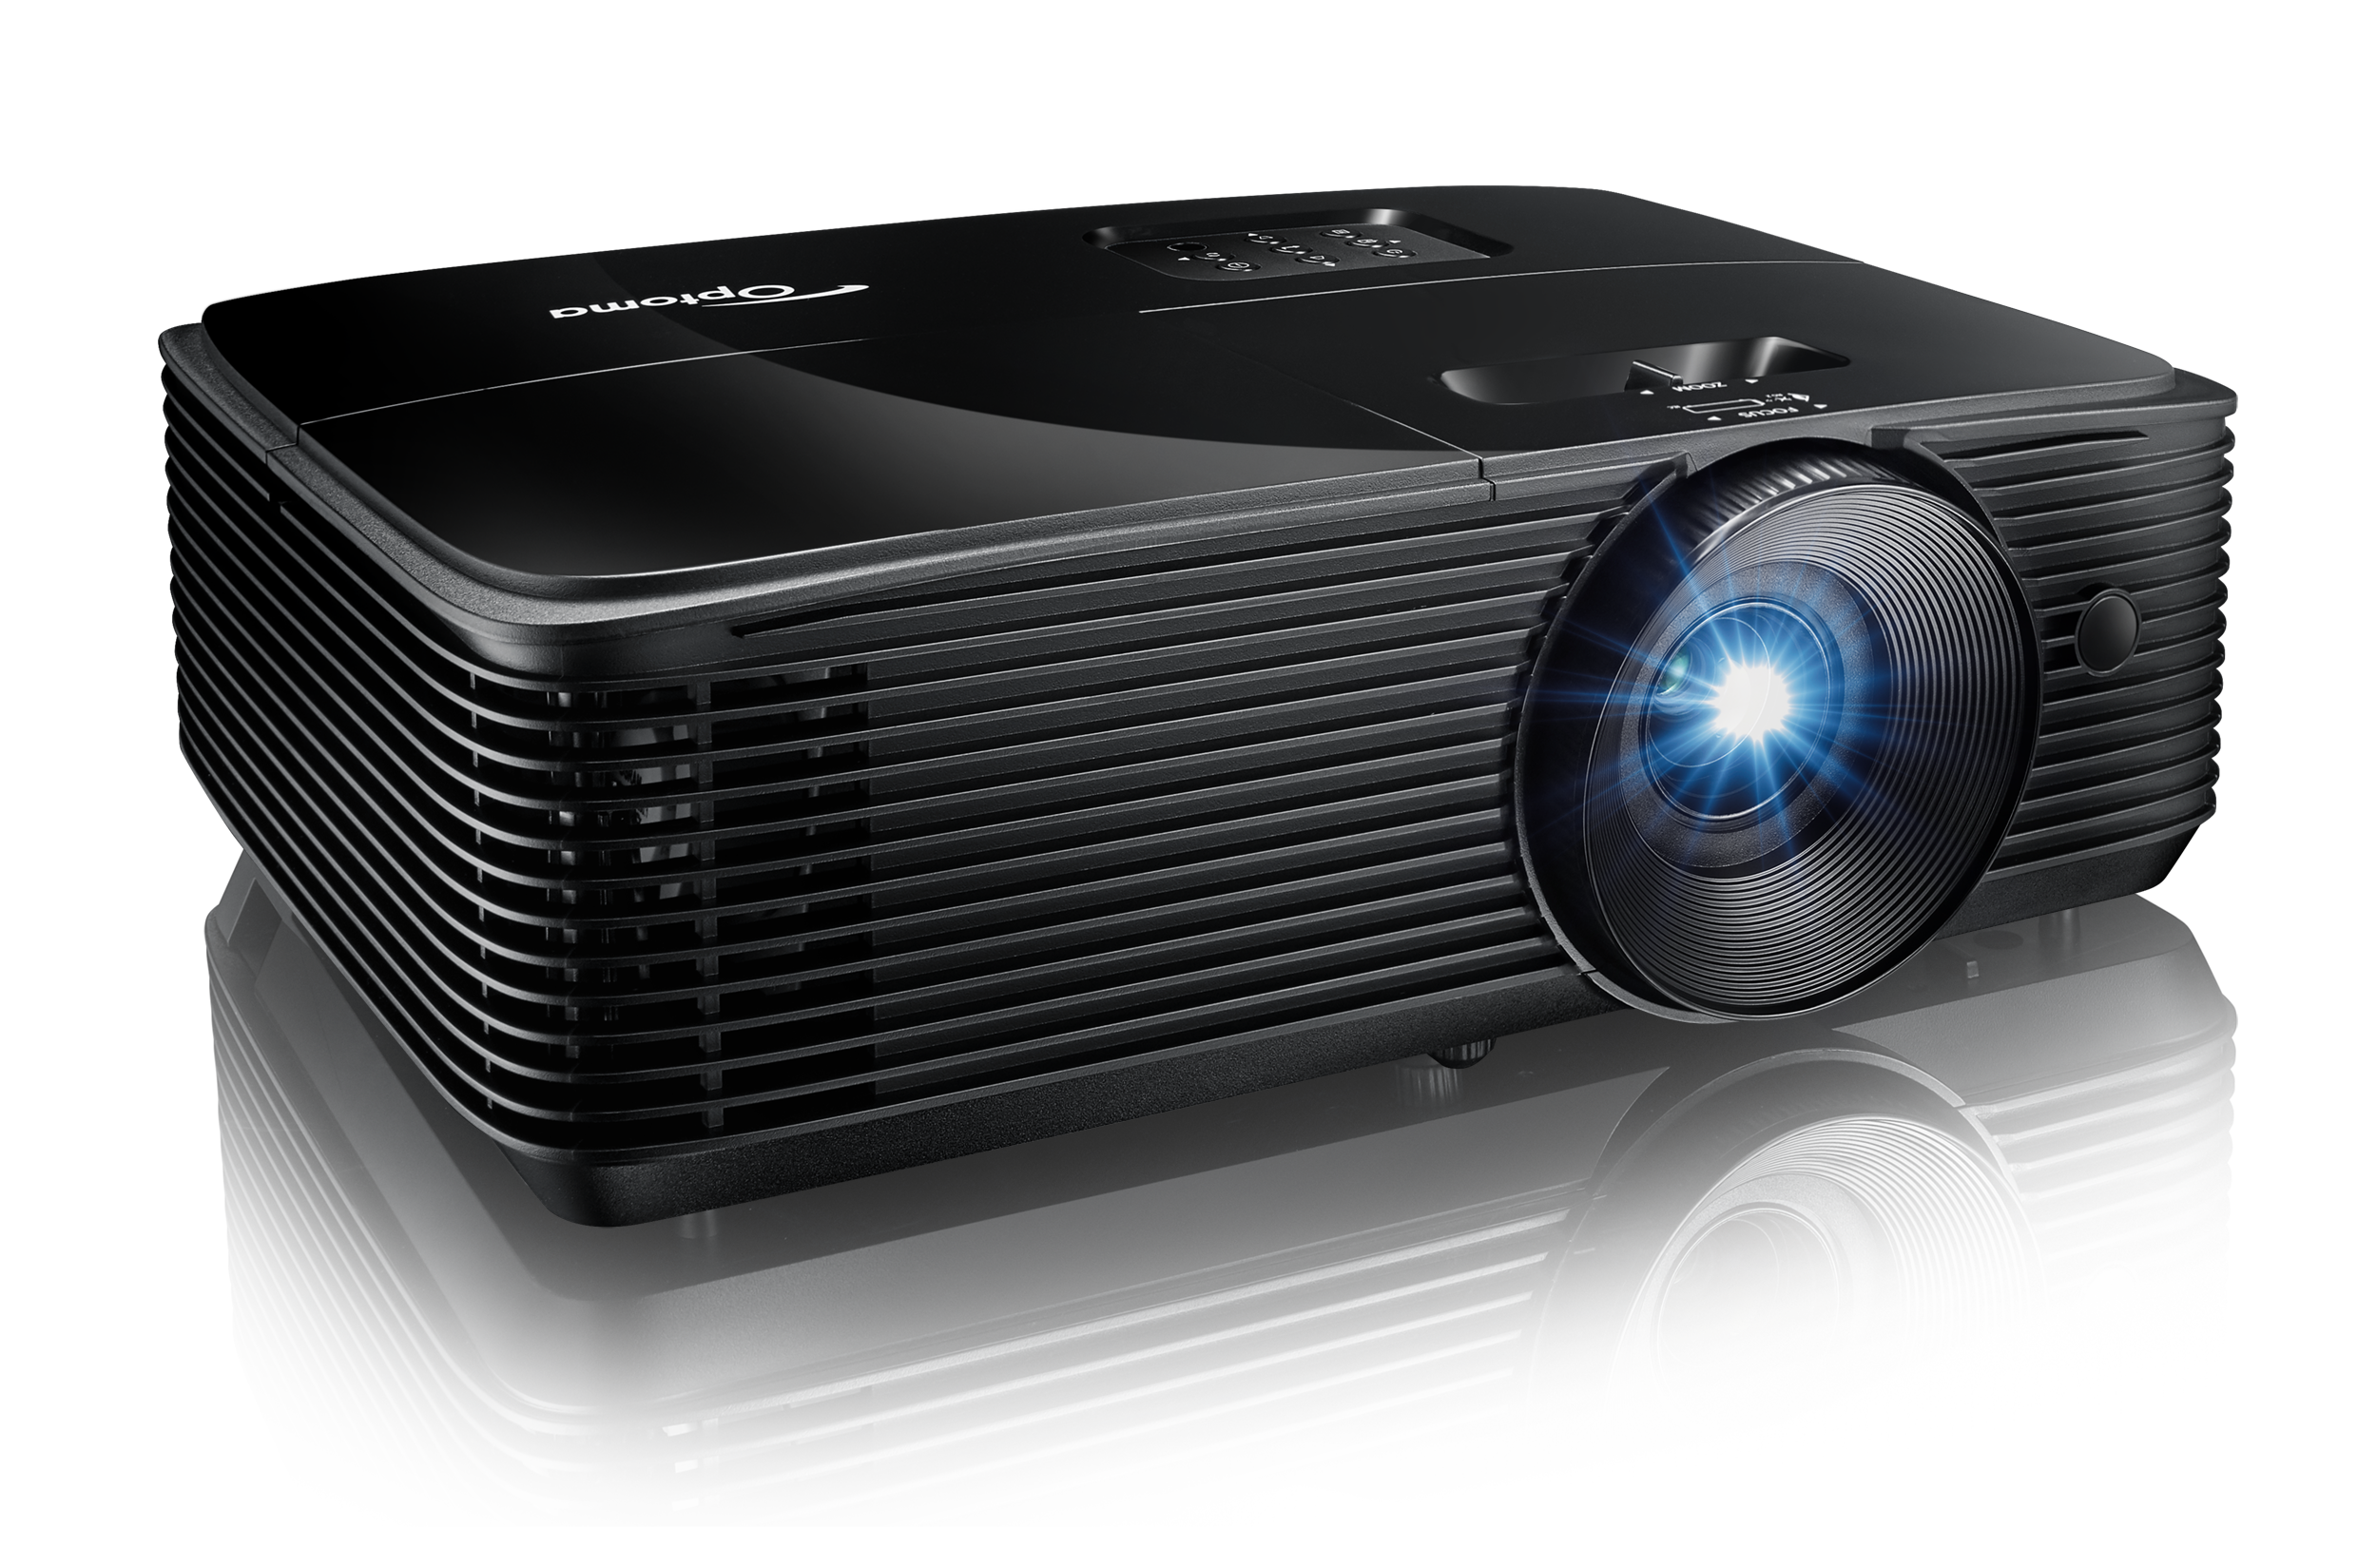 HD146X Full HD 1080p Vibrant Home Theater Projector for Movies and Gaming, 3600 Lumens - image 4 of 9